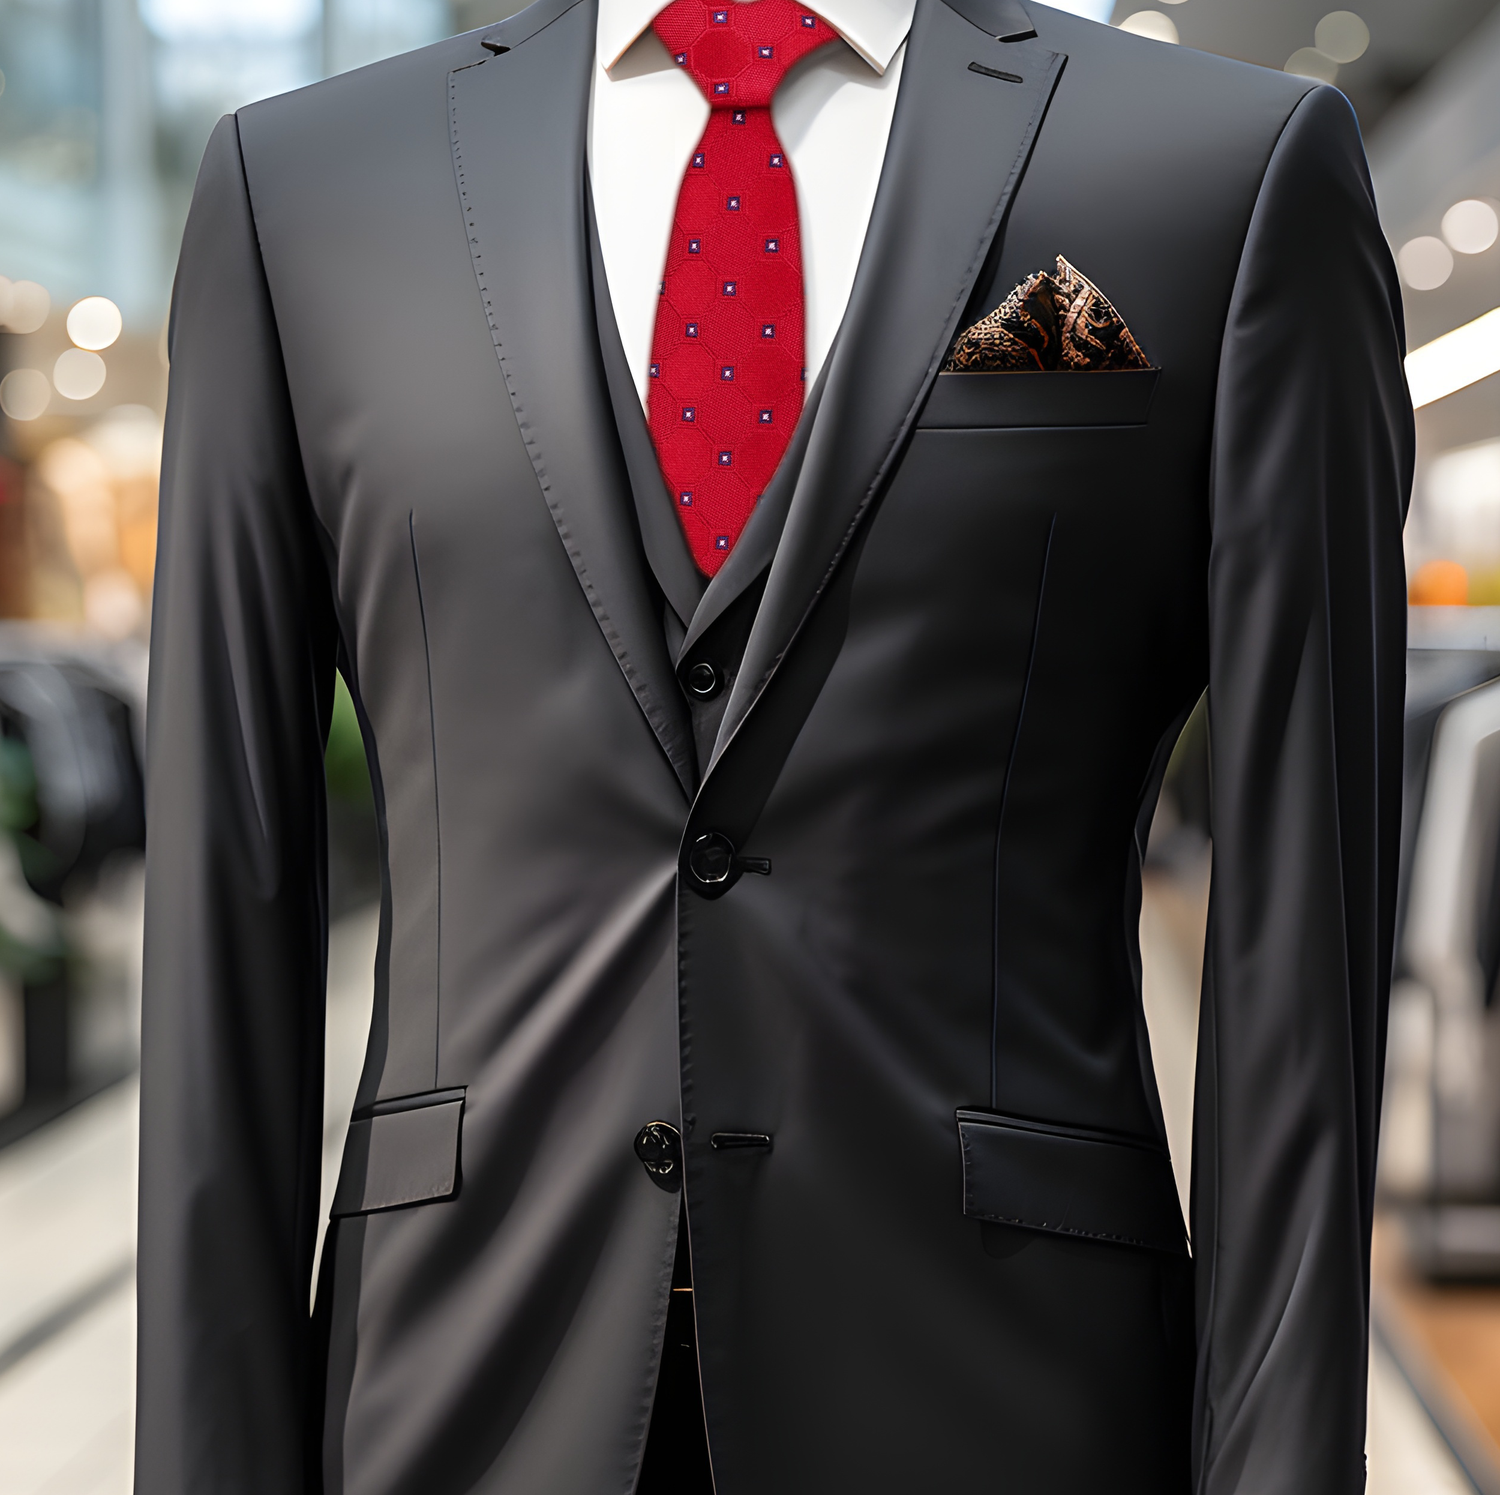 Powerful red tie with grey suit